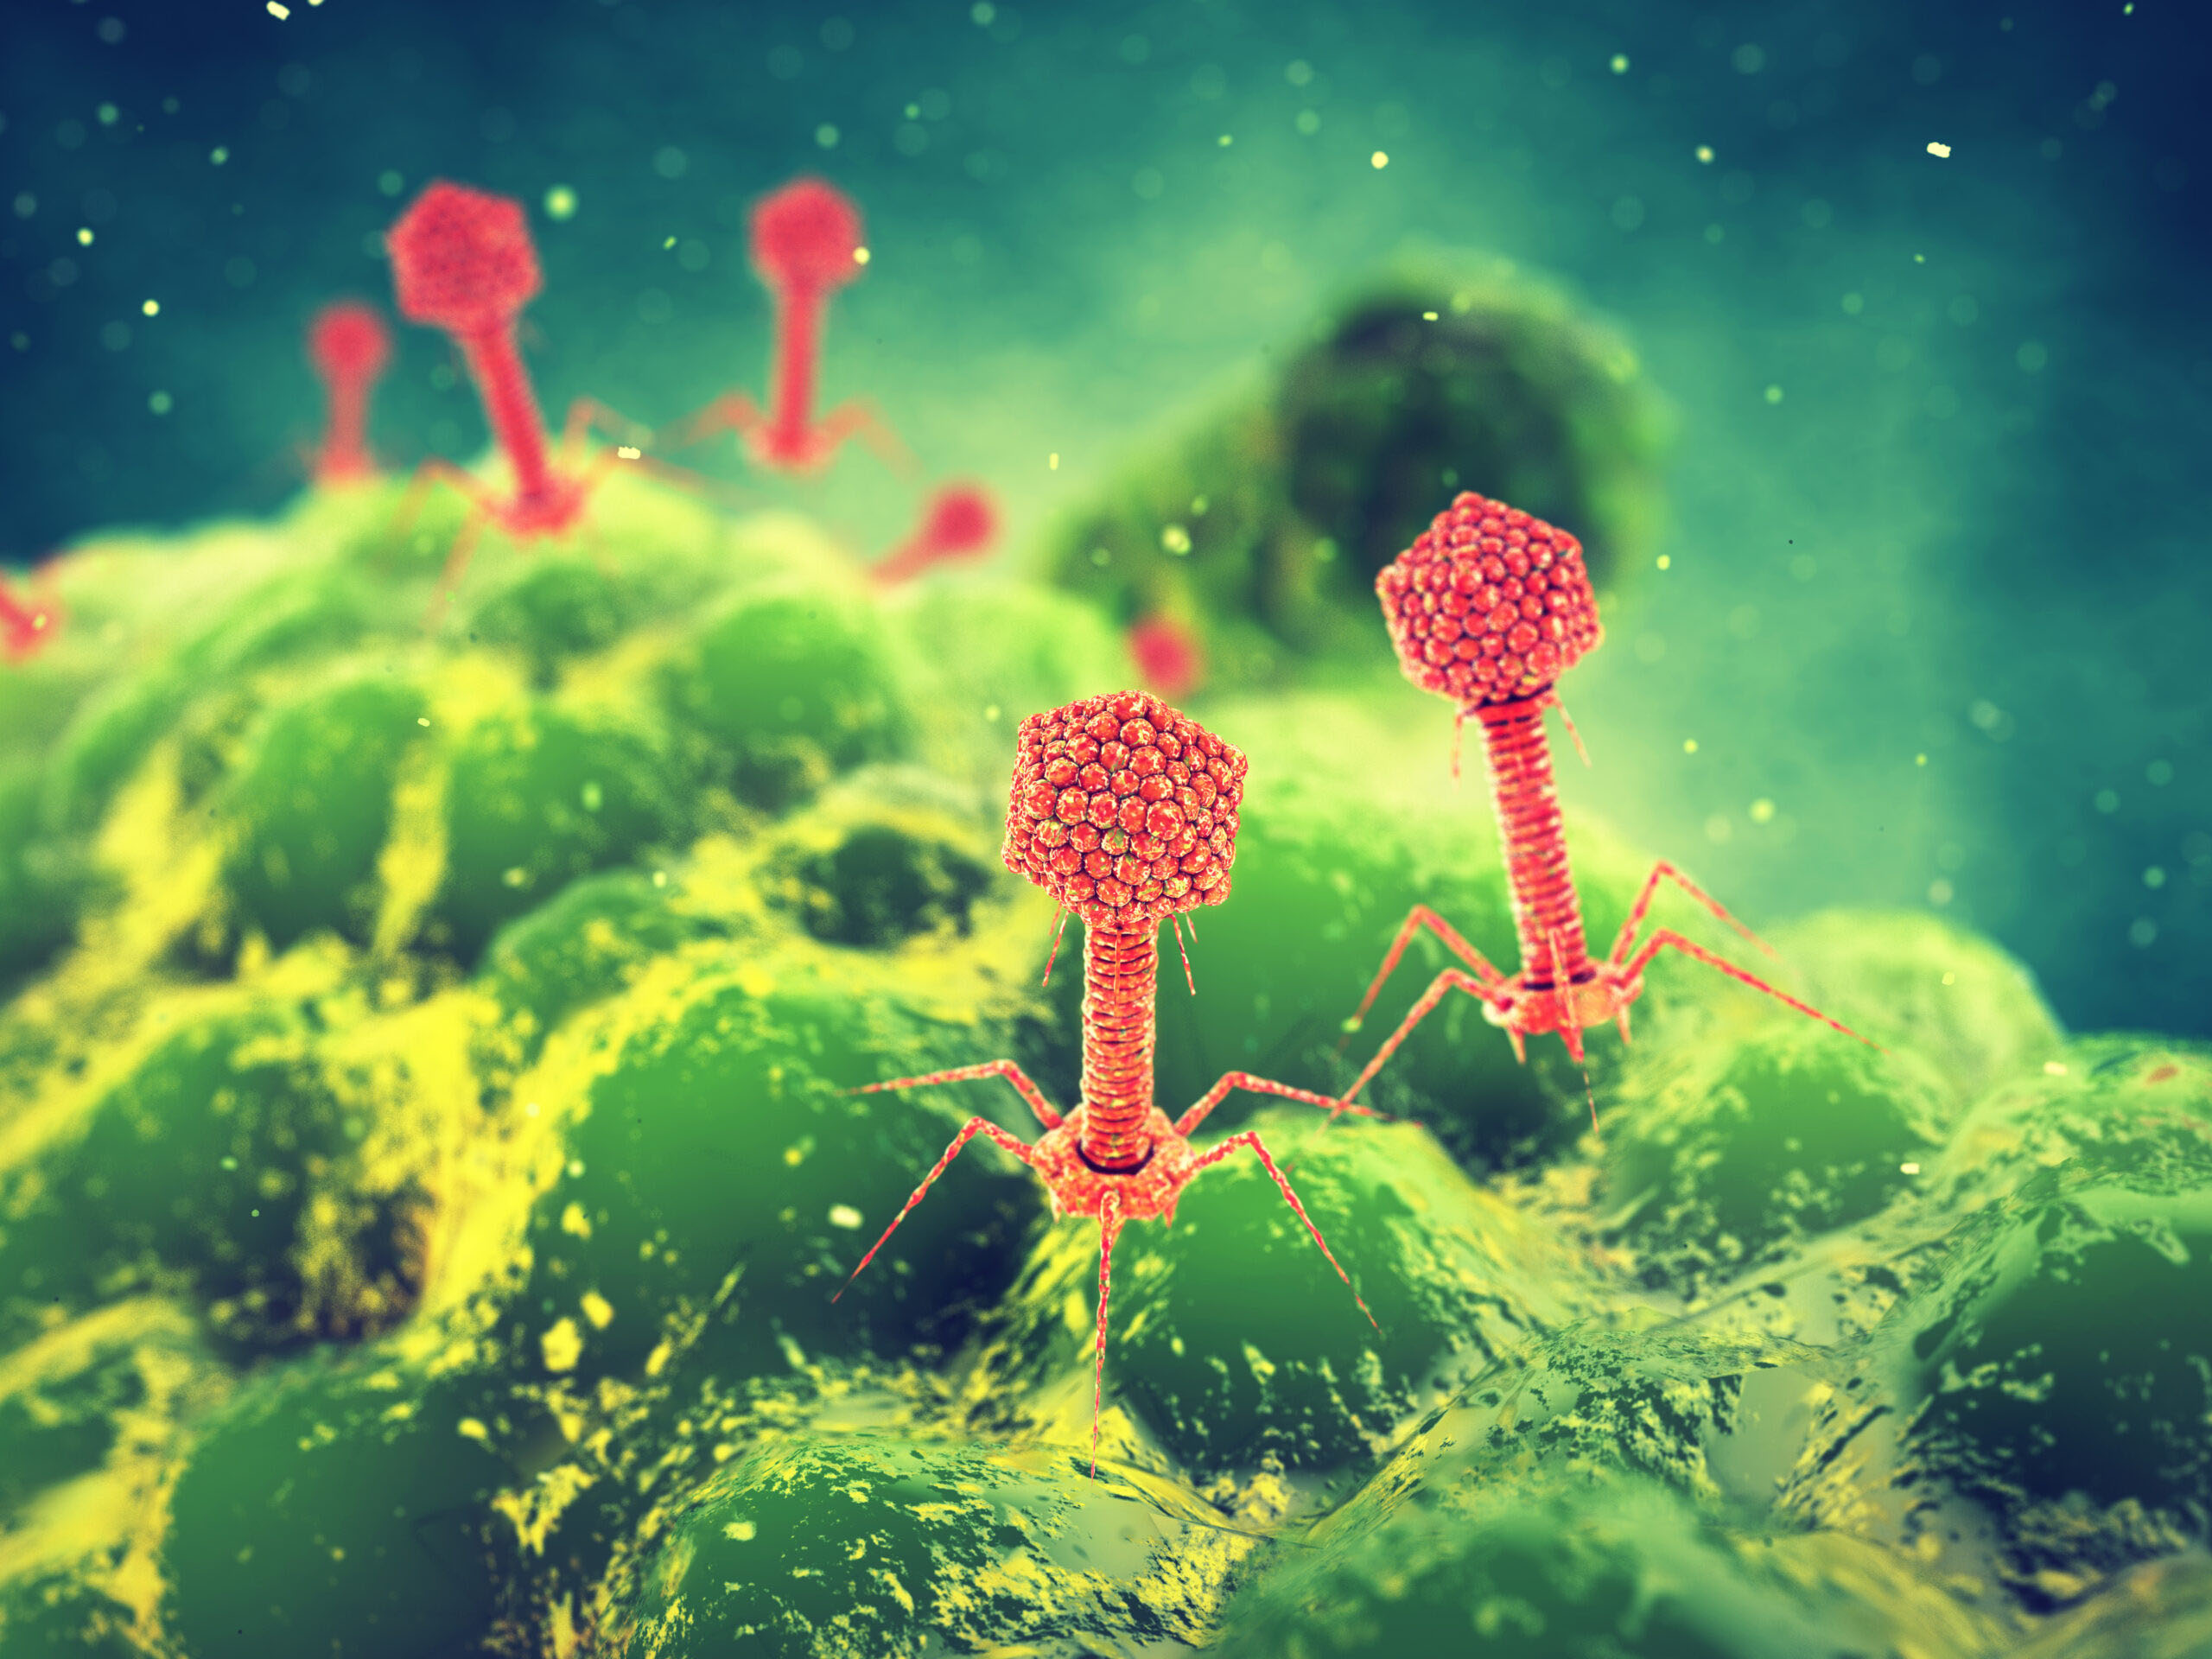 A rendering of bacteriophage viruses attacking a bacteria